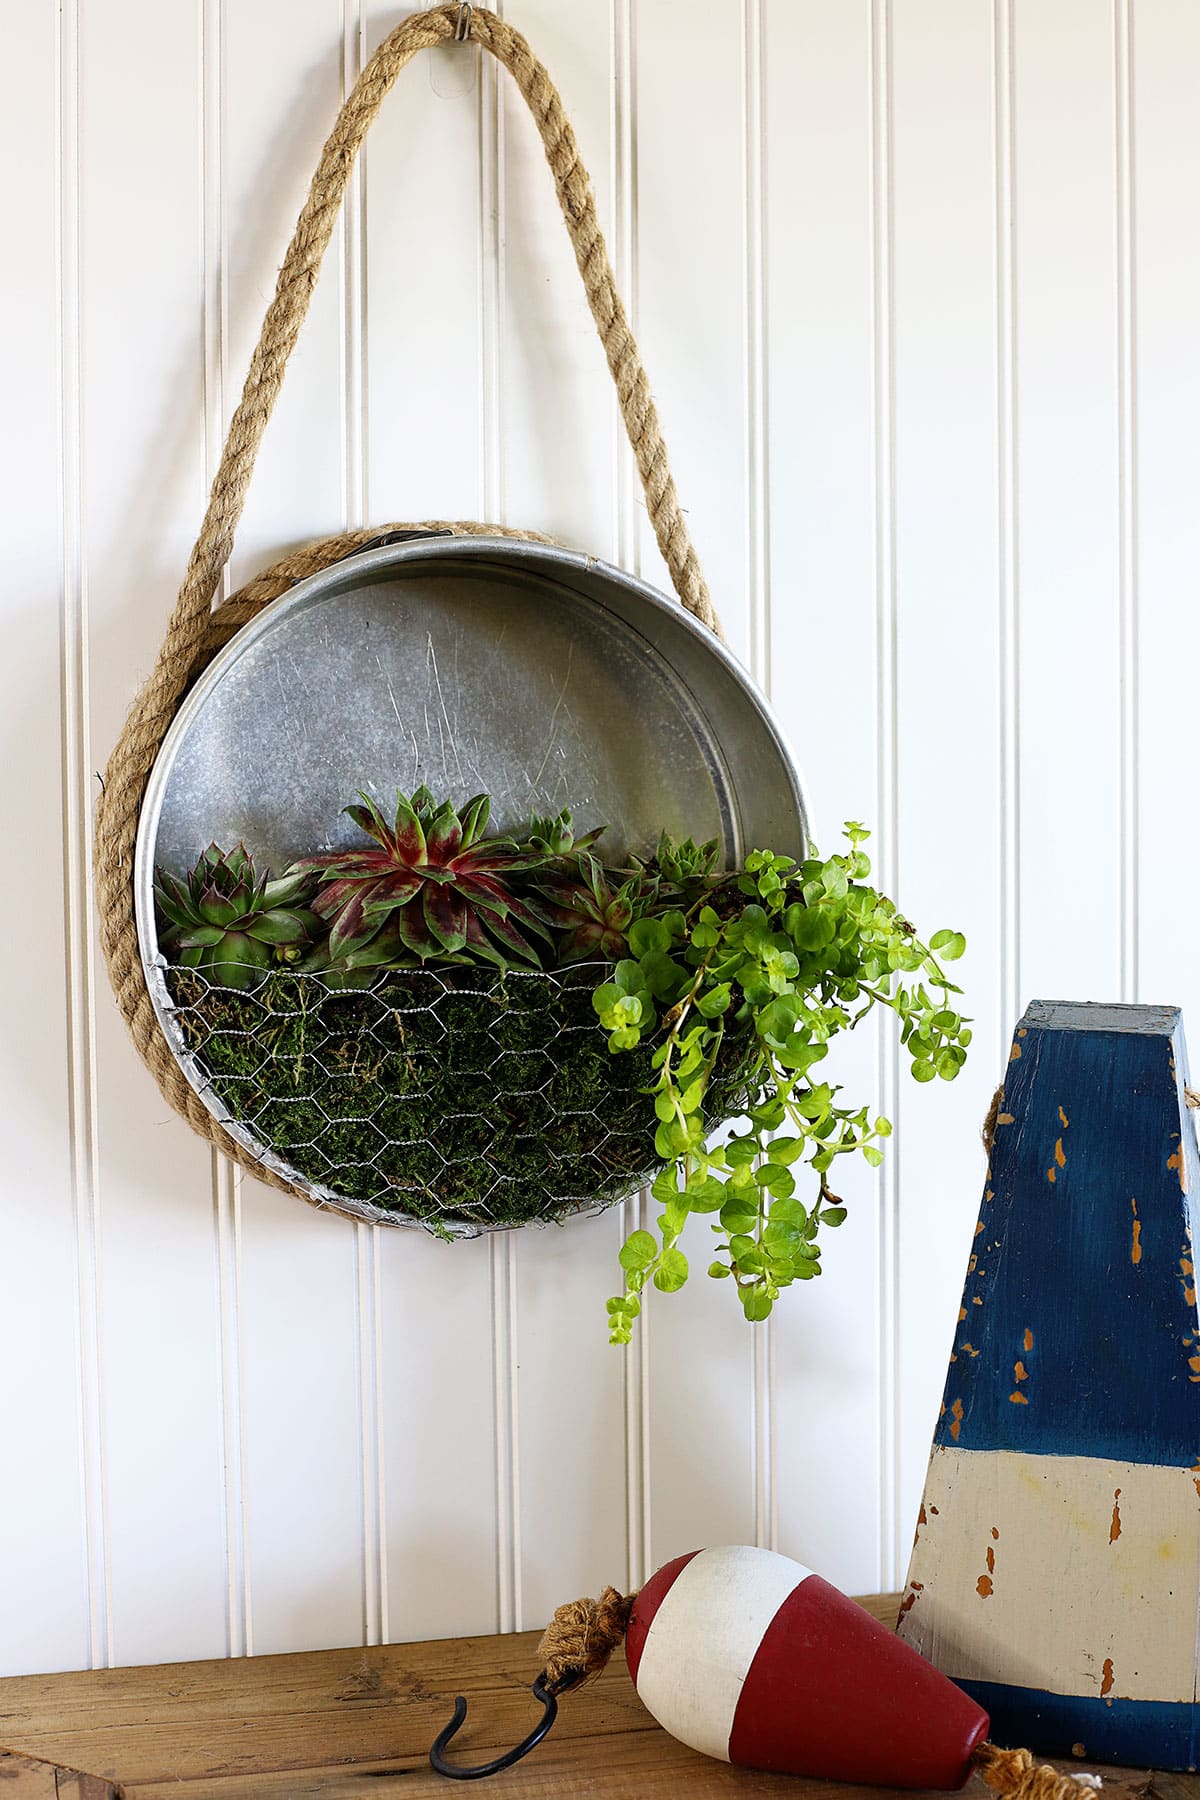 Learn how to repurpose a thrift store staple - the springform cake pan - into a nautical farmhouse style planter! Quick & easy thrift store makeover.